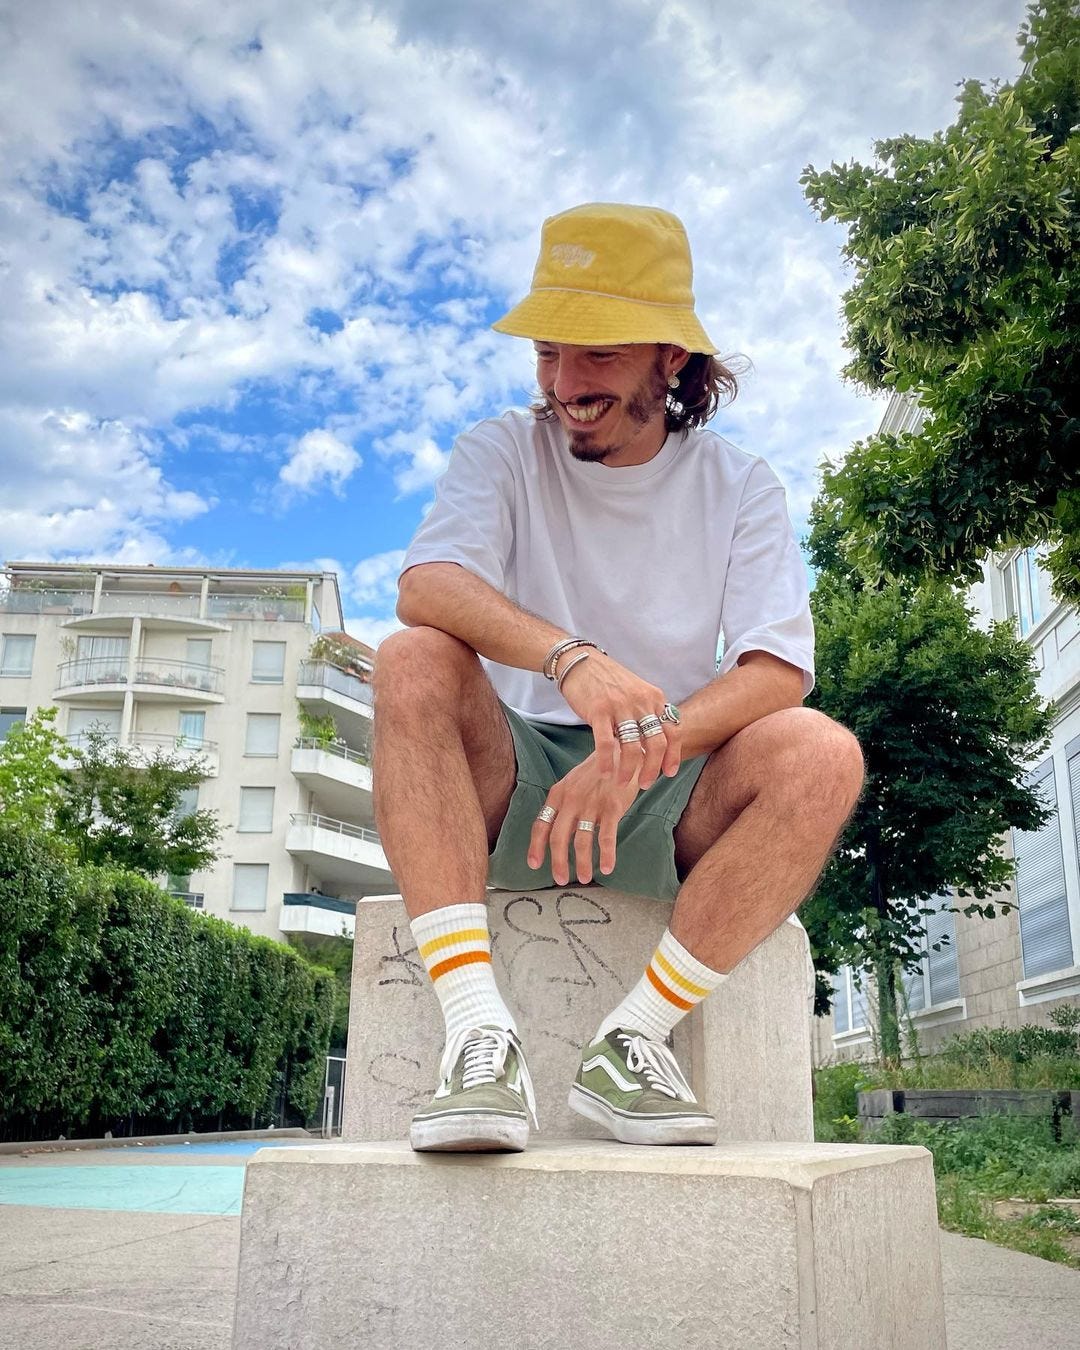 man smiling, wearing a yellow bucket hat, white t-shirt, green shorts, and tall socks with Vans sneakers